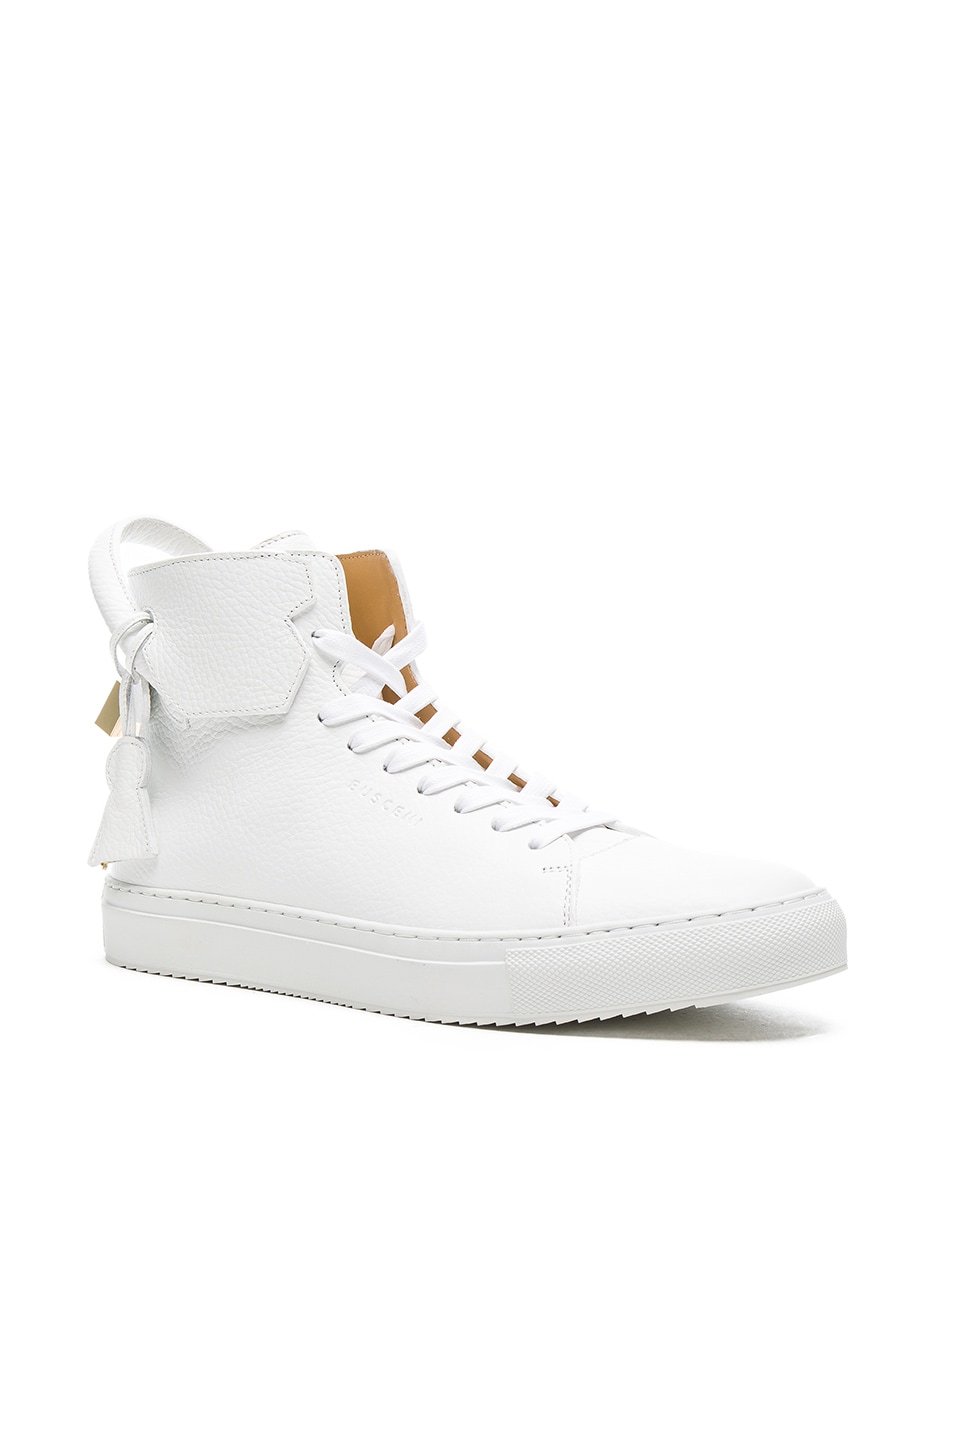 Image 1 of Buscemi 125 MM High Top Sneaker in White